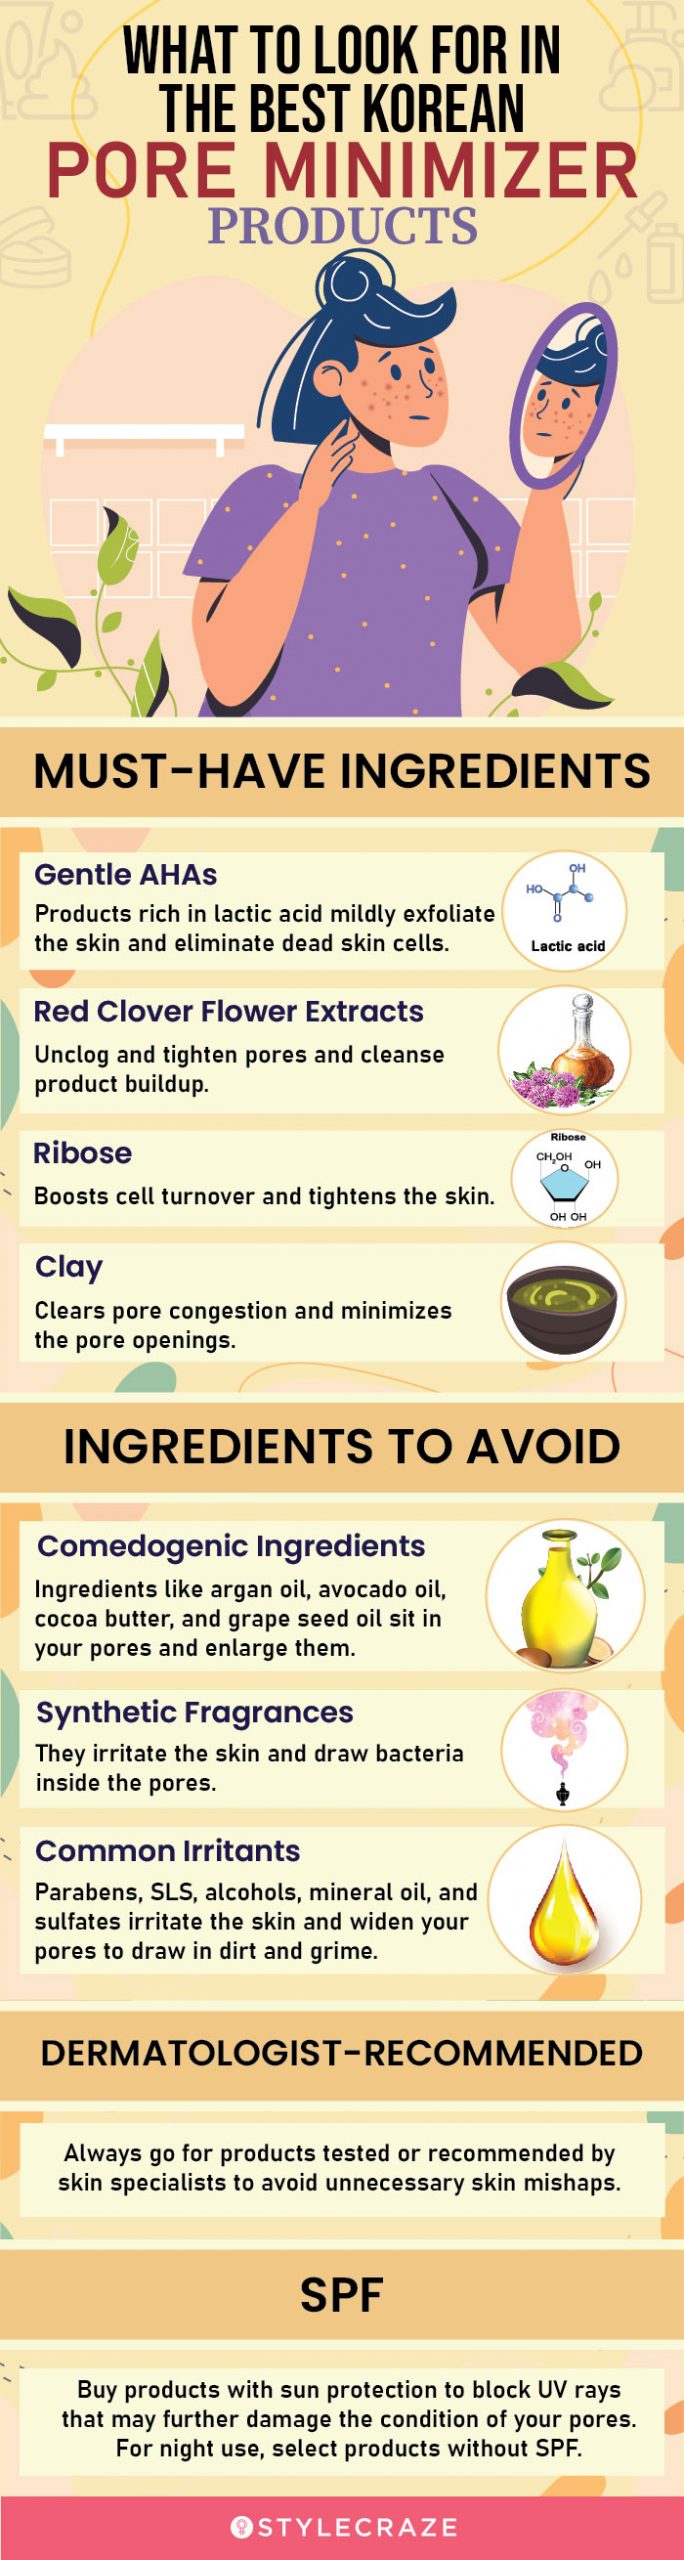 What To Look For InThe Best Korean Pore Minimizer Products (infographic)